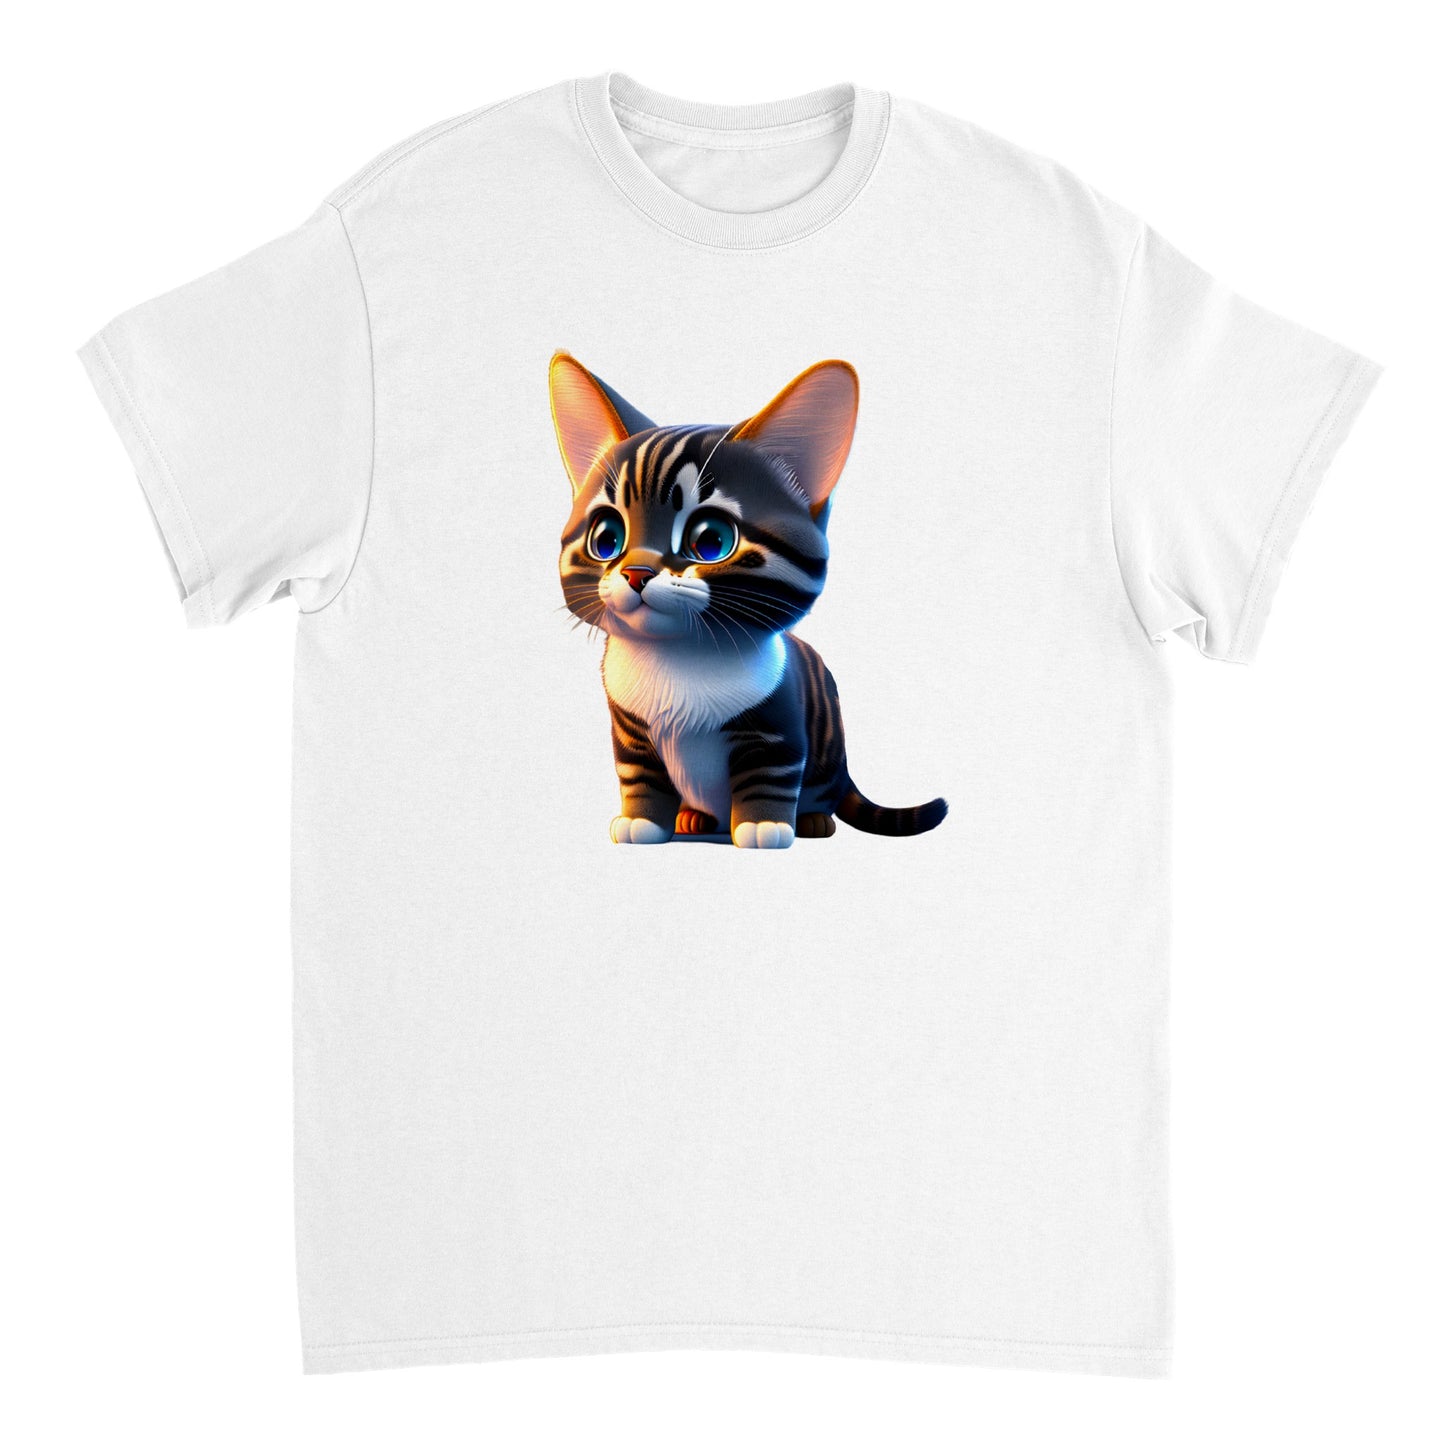 Adorable, Cool, Cute Cats and Kittens Toy - Heavyweight Unisex Crewneck T-shirt 35